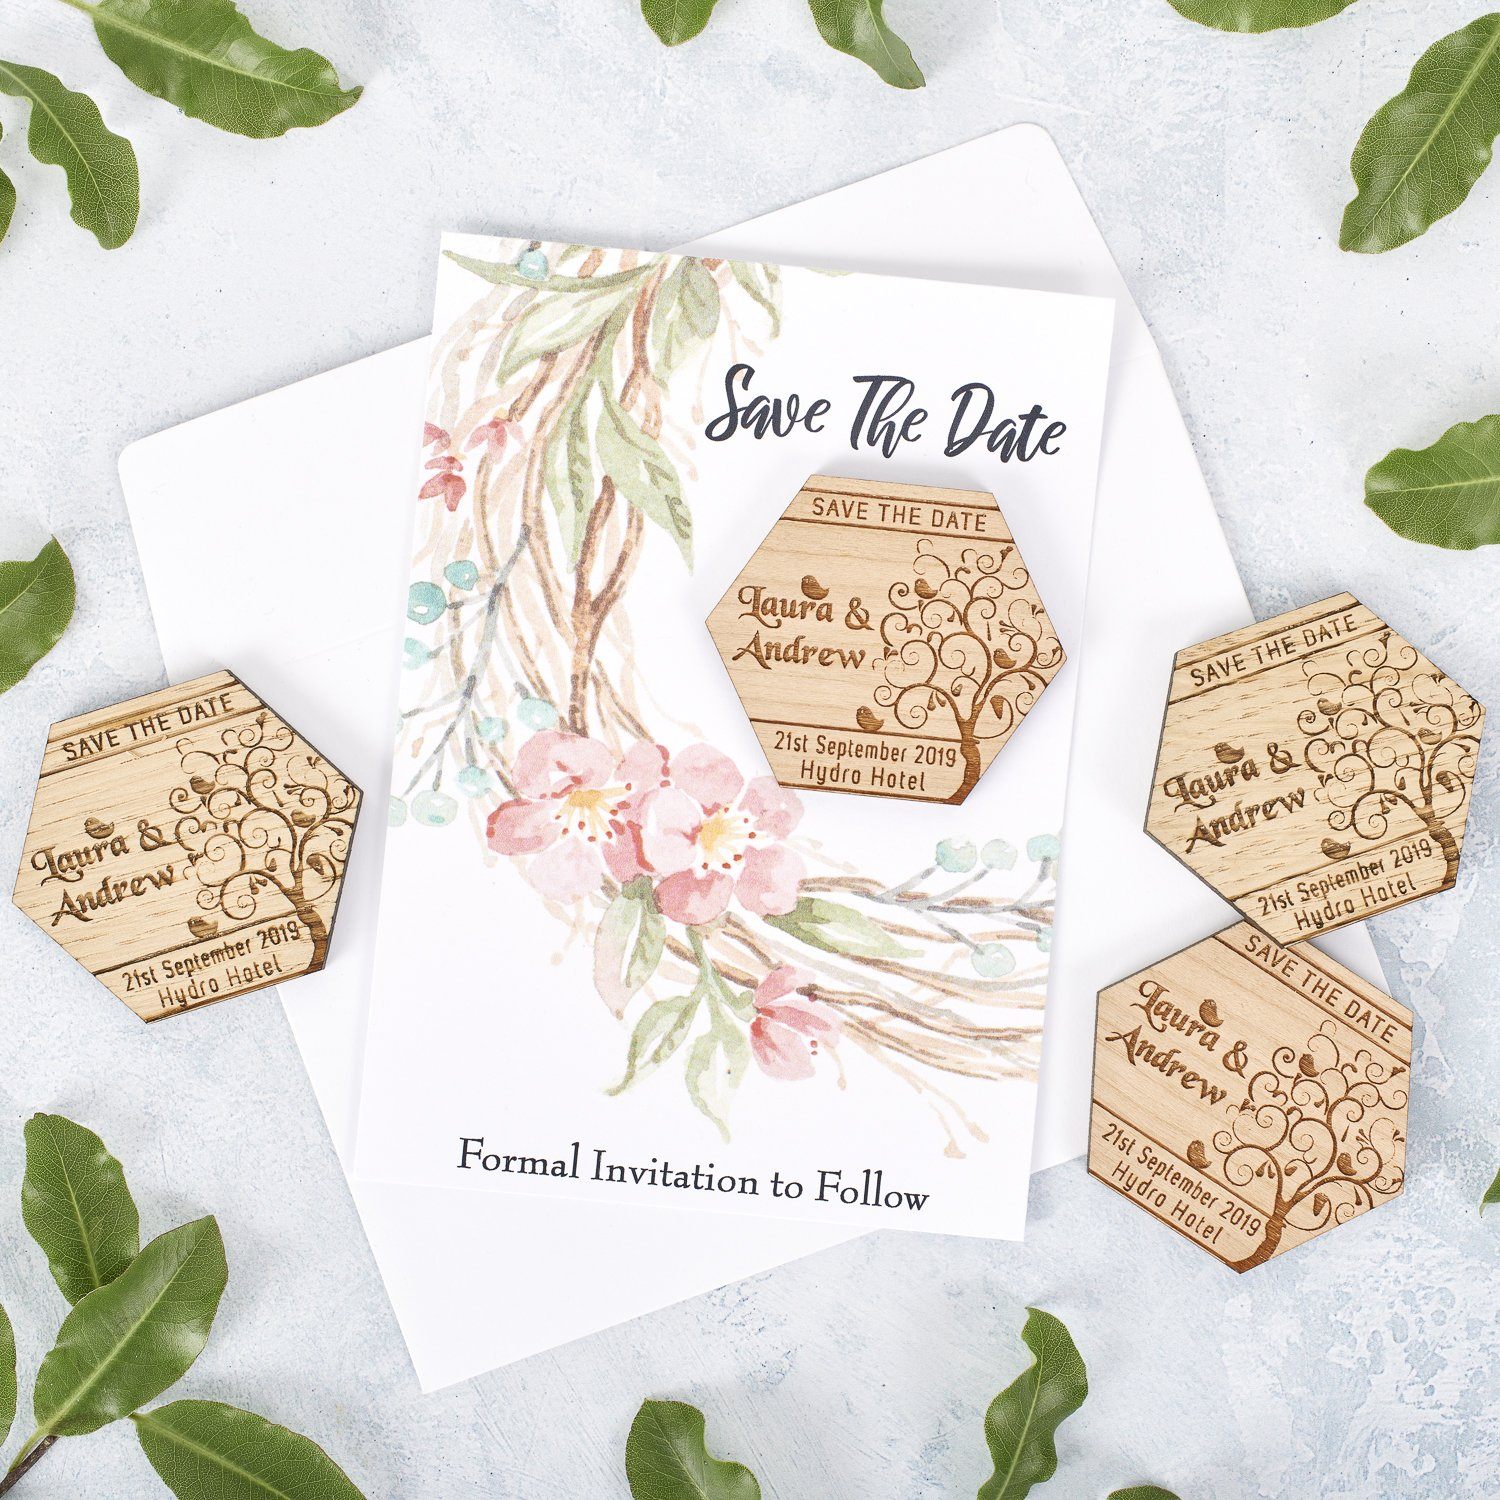 Save The Date Magnet With Cards - Save The Date Magnet Wooden Rustic & Cards - Hexagon